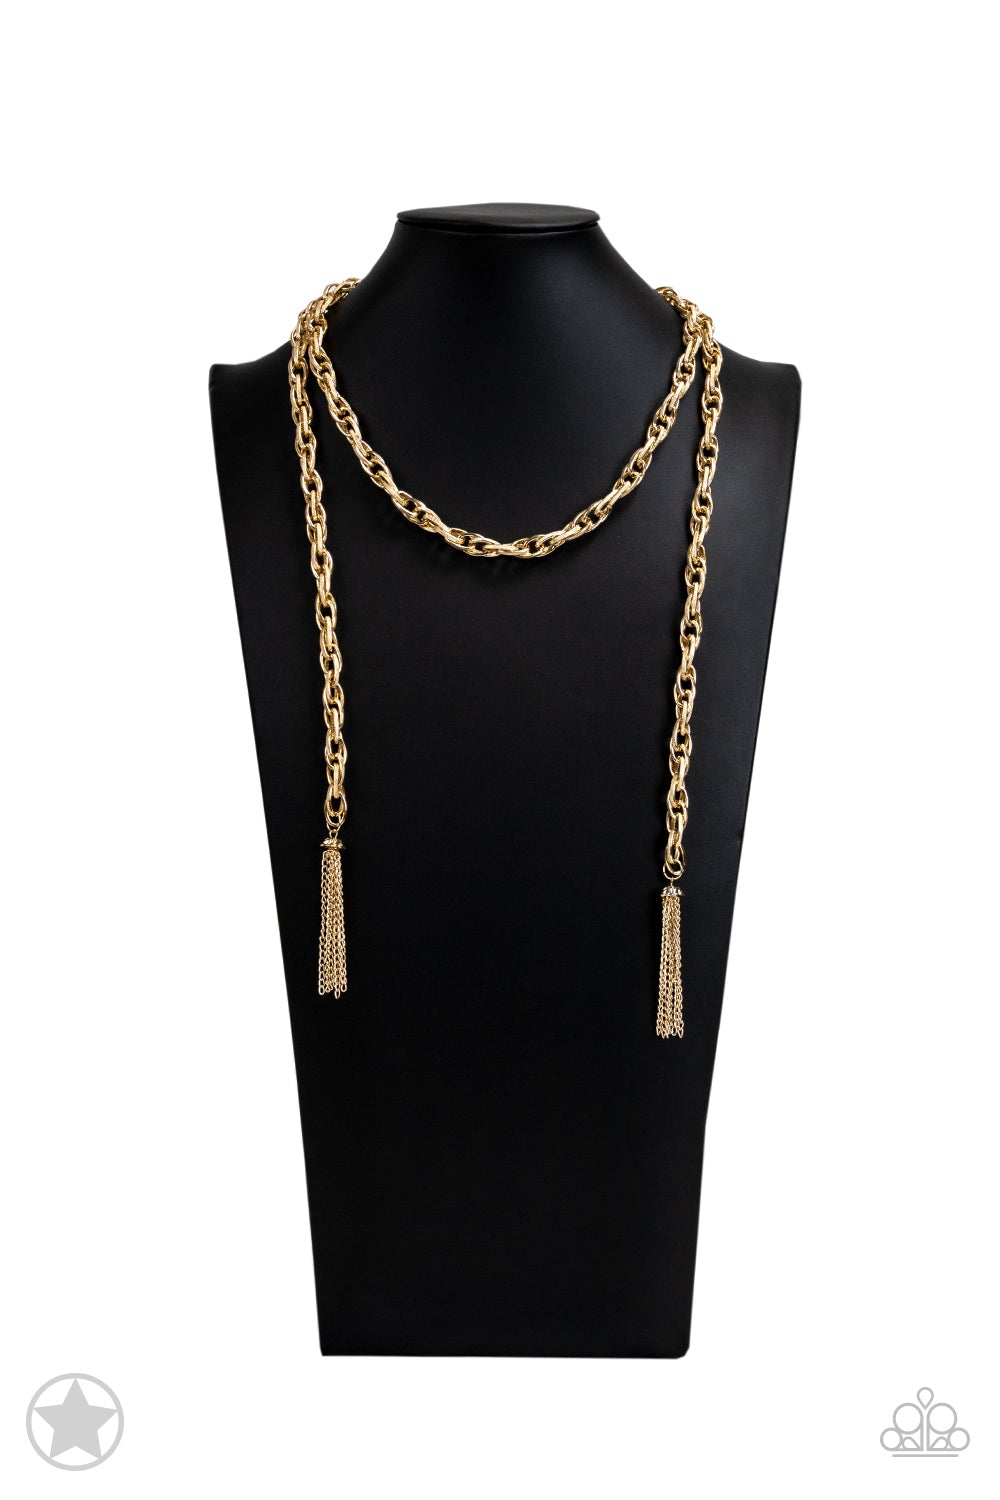 Scarfed for Attention Gold Chain Necklace and matching Earrings - Paparazzi Accessories- on bust -CarasShop.com - $5 Jewelry by Cara Jewels